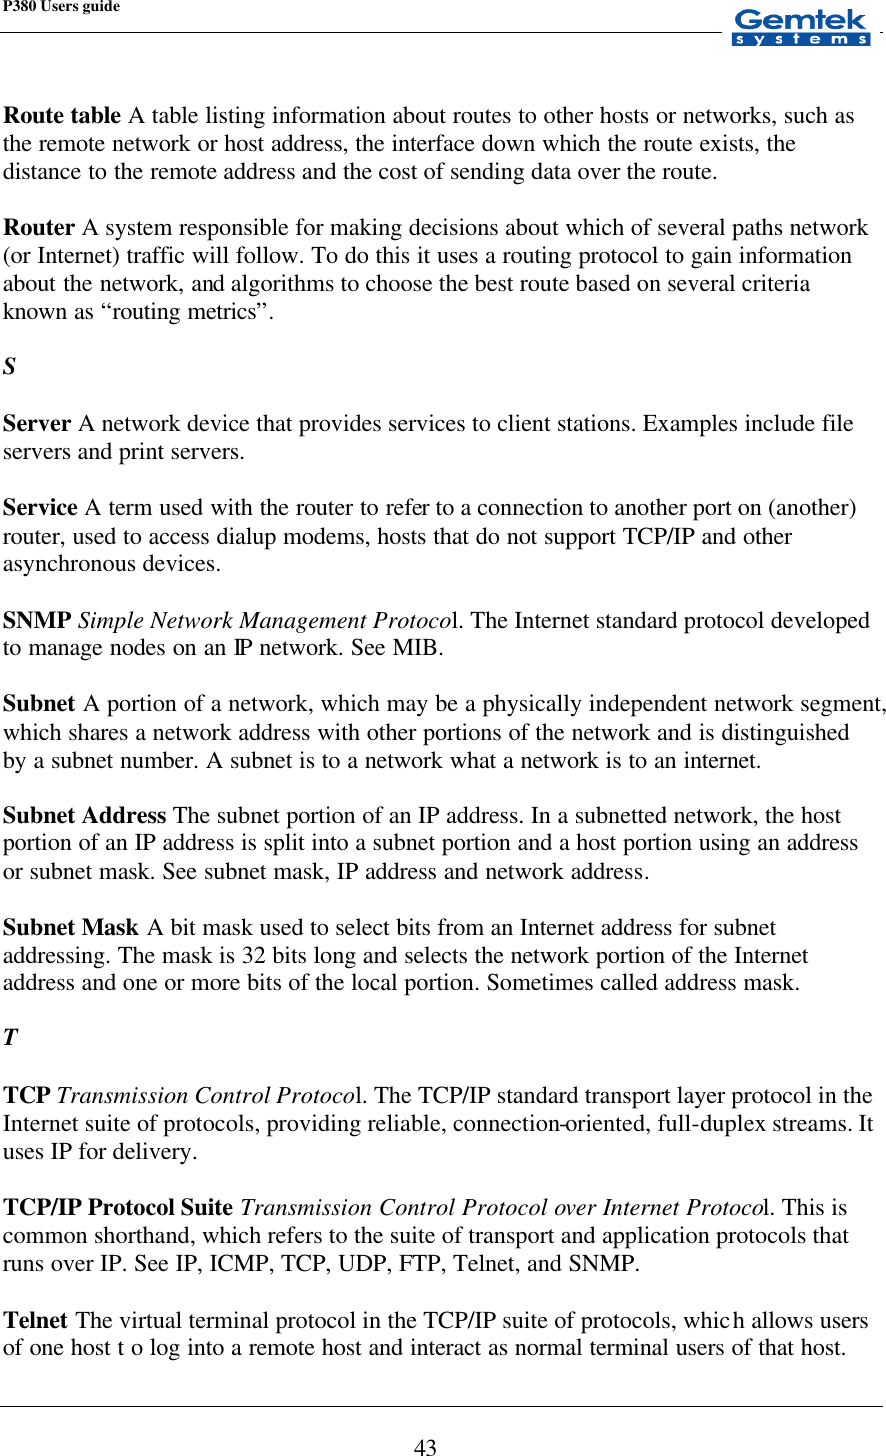 P380 Users guide            43  Route table A table listing information about routes to other hosts or networks, such as the remote network or host address, the interface down which the route exists, the distance to the remote address and the cost of sending data over the route.  Router A system responsible for making decisions about which of several paths network (or Internet) traffic will follow. To do this it uses a routing protocol to gain information about the network, and algorithms to choose the best route based on several criteria known as “routing metrics”.  S  Server A network device that provides services to client stations. Examples include file servers and print servers.  Service A term used with the router to refer to a connection to another port on (another) router, used to access dialup modems, hosts that do not support TCP/IP and other asynchronous devices.  SNMP Simple Network Management Protocol. The Internet standard protocol developed to manage nodes on an IP network. See MIB.  Subnet A portion of a network, which may be a physically independent network segment, which shares a network address with other portions of the network and is distinguished by a subnet number. A subnet is to a network what a network is to an internet.  Subnet Address The subnet portion of an IP address. In a subnetted network, the host portion of an IP address is split into a subnet portion and a host portion using an address or subnet mask. See subnet mask, IP address and network address.  Subnet Mask A bit mask used to select bits from an Internet address for subnet addressing. The mask is 32 bits long and selects the network portion of the Internet address and one or more bits of the local portion. Sometimes called address mask.  T  TCP Transmission Control Protocol. The TCP/IP standard transport layer protocol in the Internet suite of protocols, providing reliable, connection-oriented, full-duplex streams. It uses IP for delivery.  TCP/IP Protocol Suite Transmission Control Protocol over Internet Protocol. This is common shorthand, which refers to the suite of transport and application protocols that runs over IP. See IP, ICMP, TCP, UDP, FTP, Telnet, and SNMP.  Telnet The virtual terminal protocol in the TCP/IP suite of protocols, which allows users of one host t o log into a remote host and interact as normal terminal users of that host. 